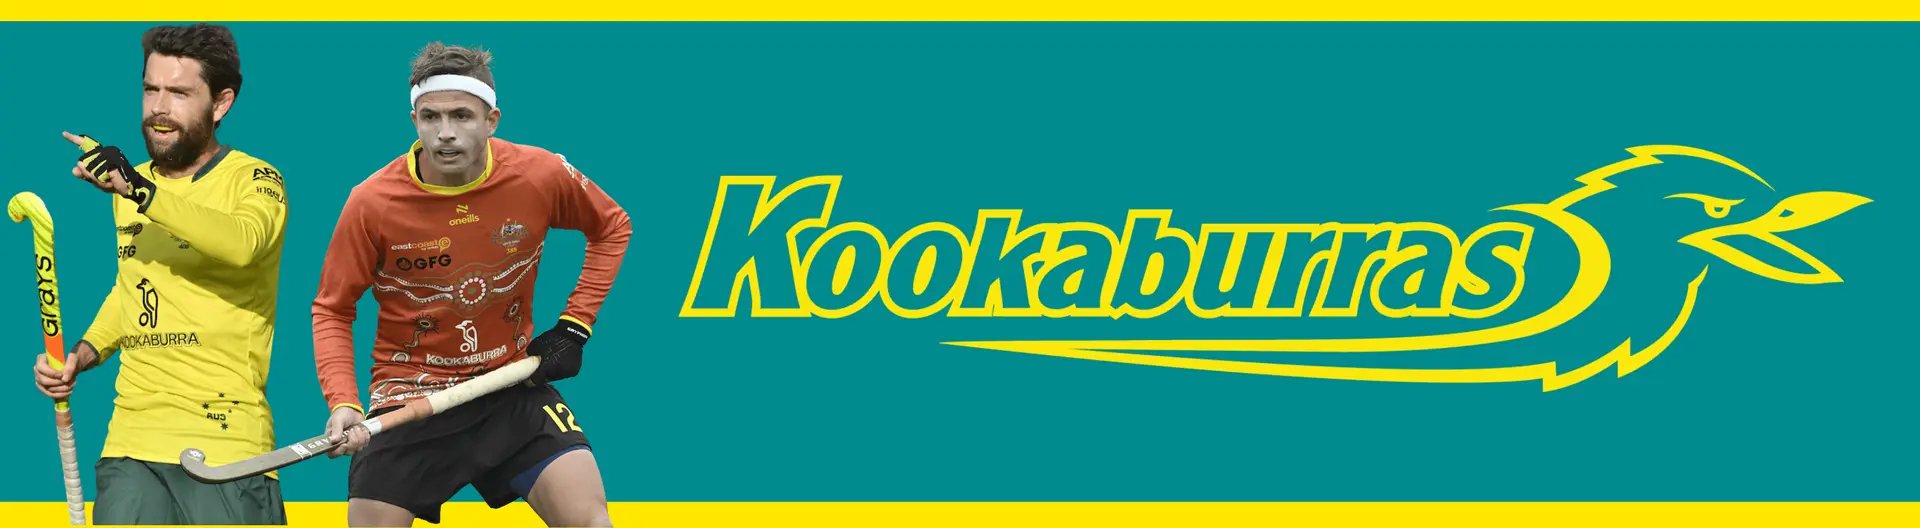 australia history making kookaburras and hockeyroos announced for paris 2024 olympic games 6685d4fa3008d - Australia: History-making Kookaburras and Hockeyroos announced for Paris 2024 Olympic Games - Australia: